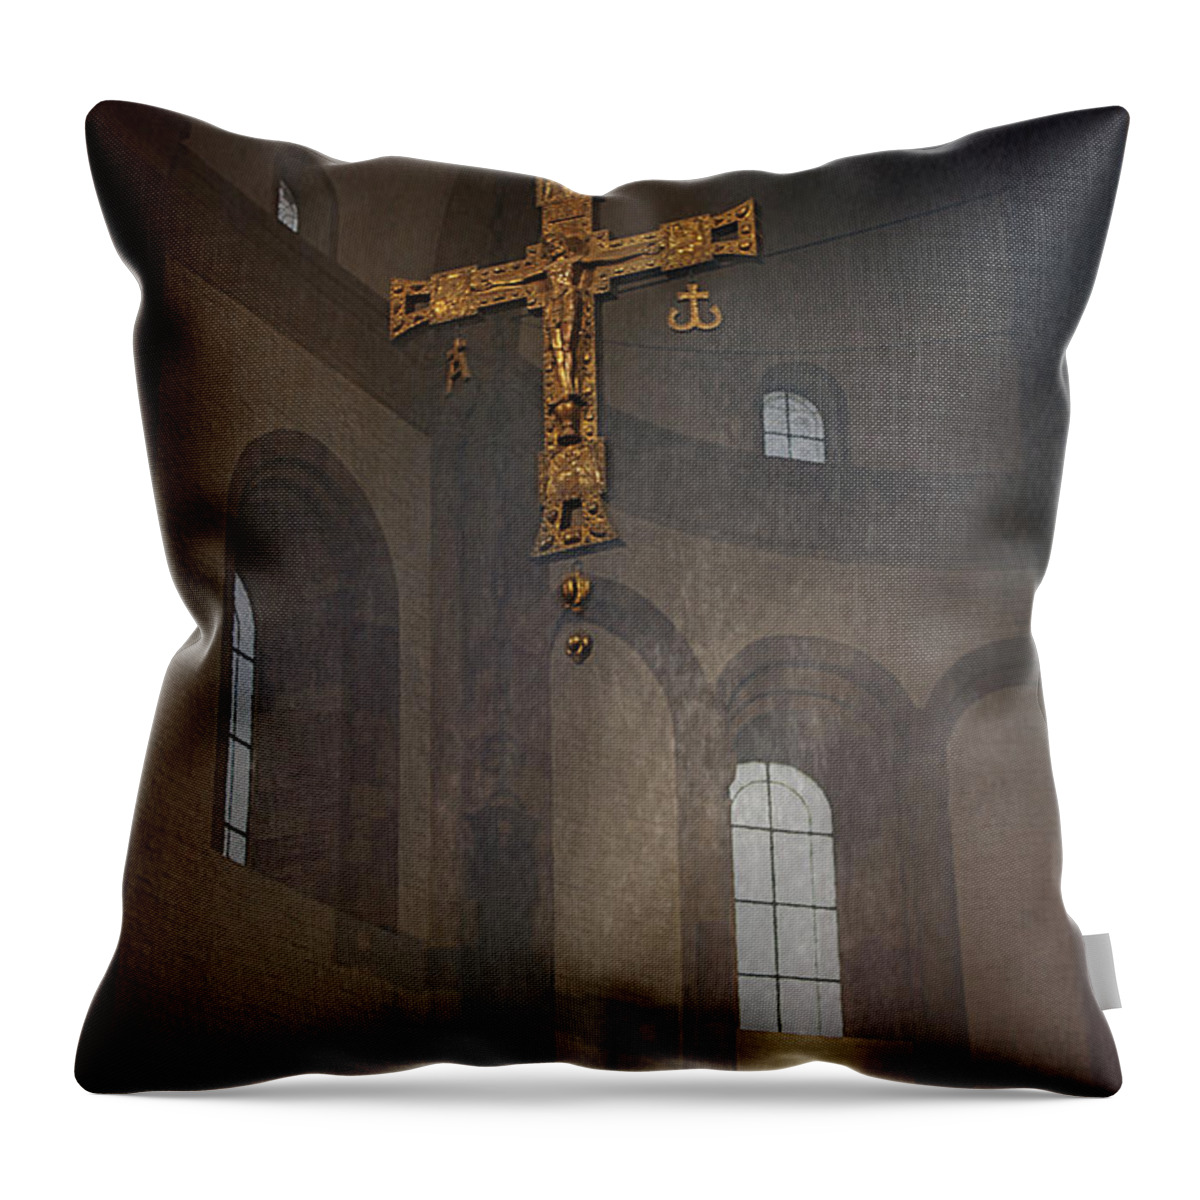 Holy Throw Pillow featuring the photograph Holy Cross by Morgan Wright